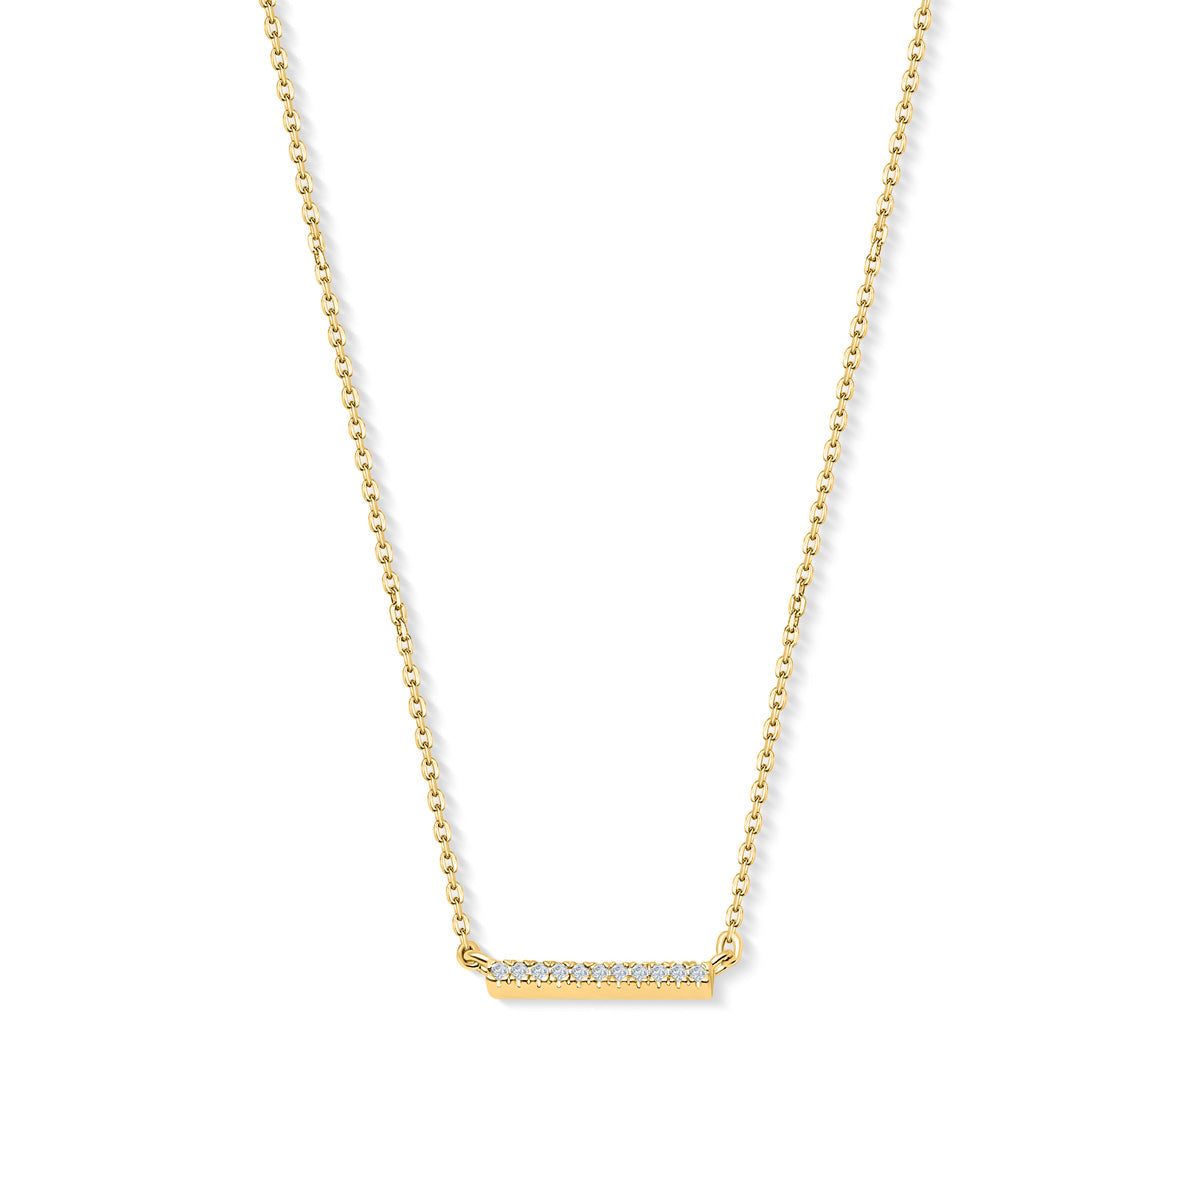 Gold chain necklace with shimmering bar